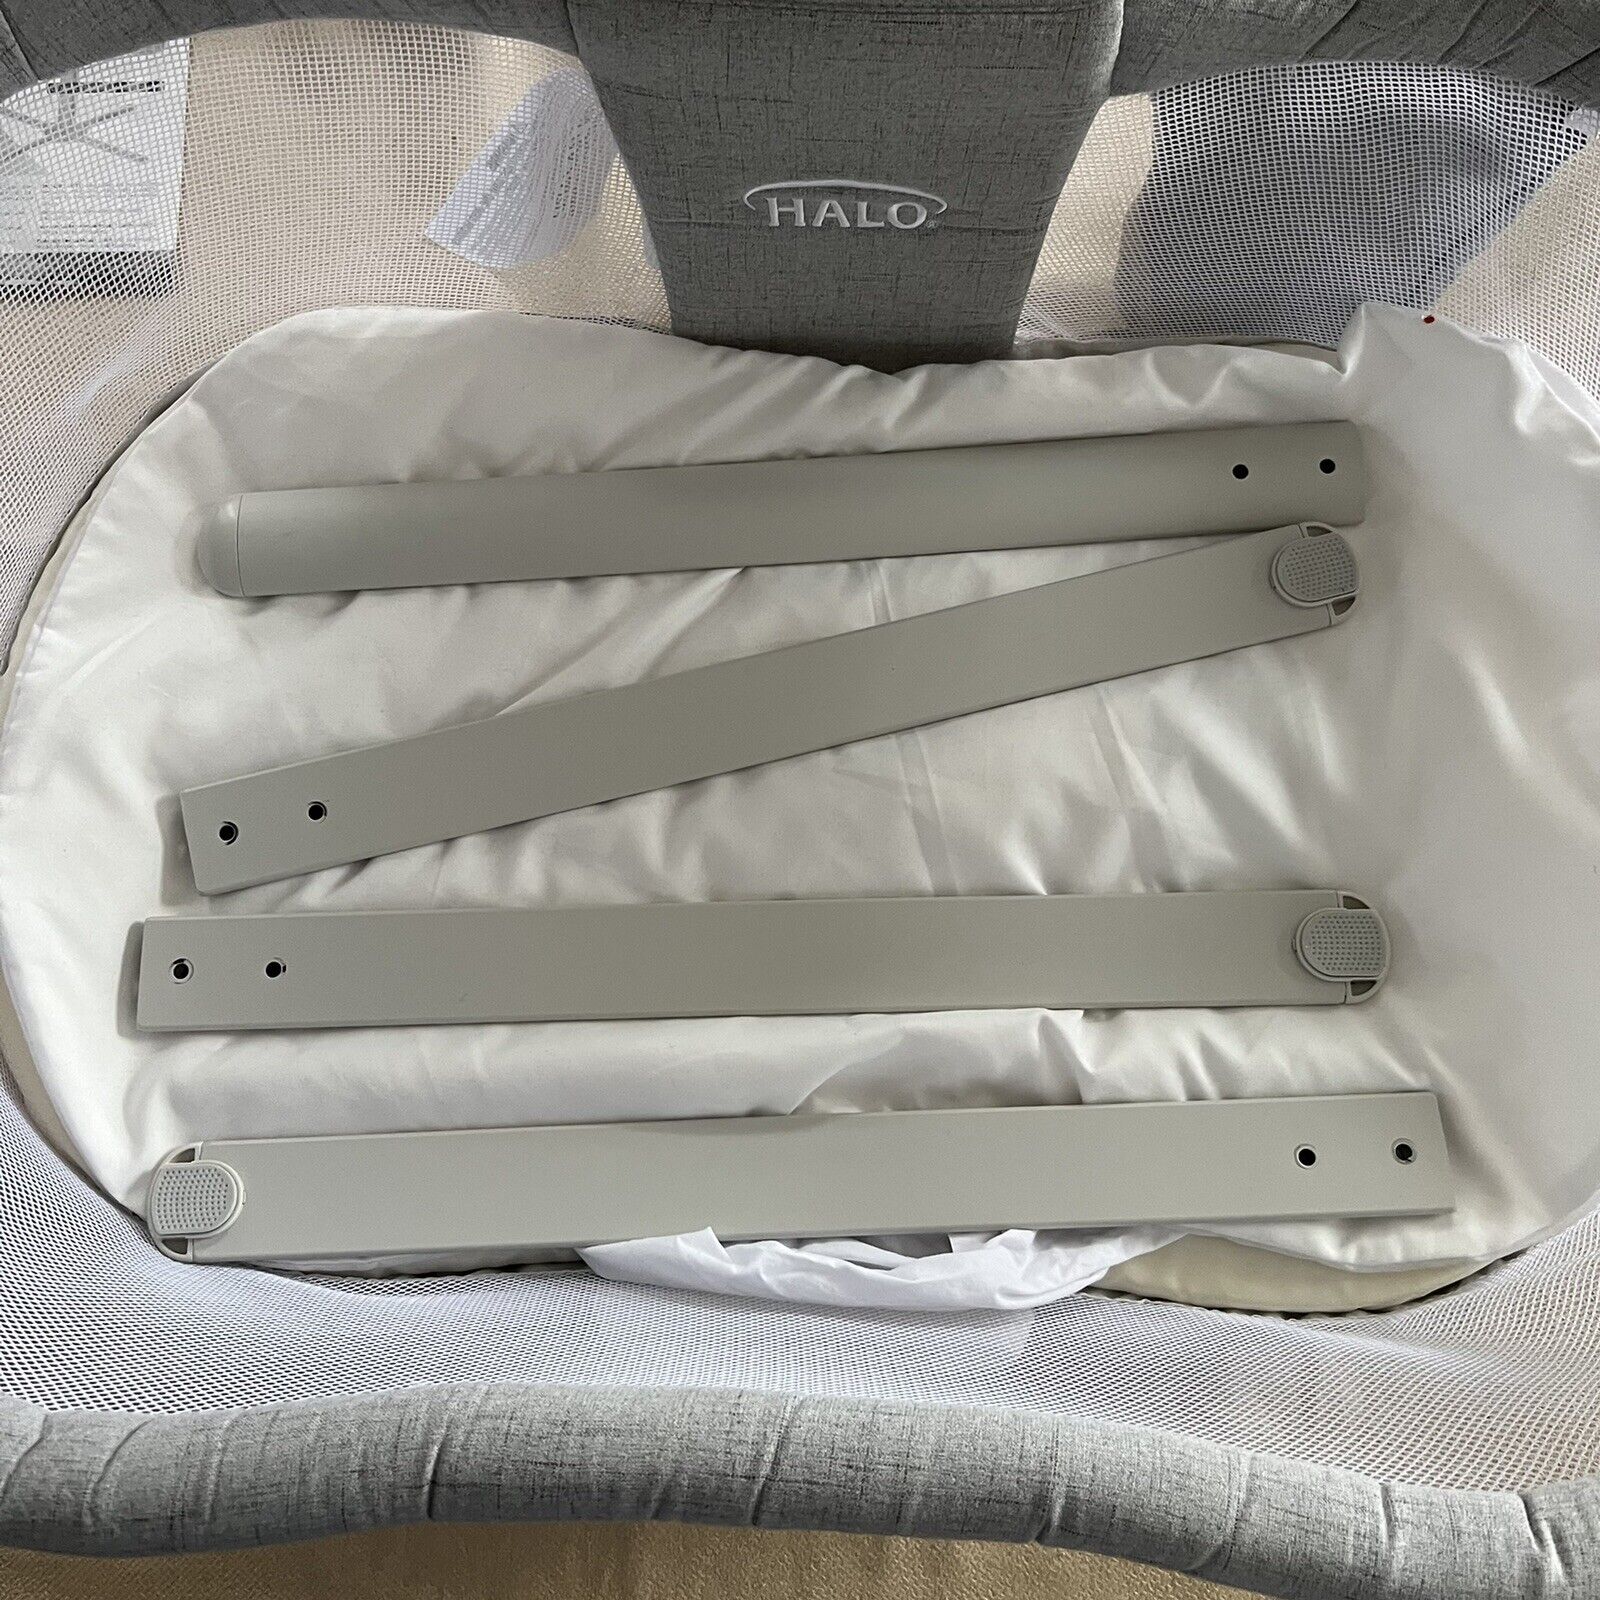 Nursery Comfort Redefined: The Halo Luxe Bassinet Review